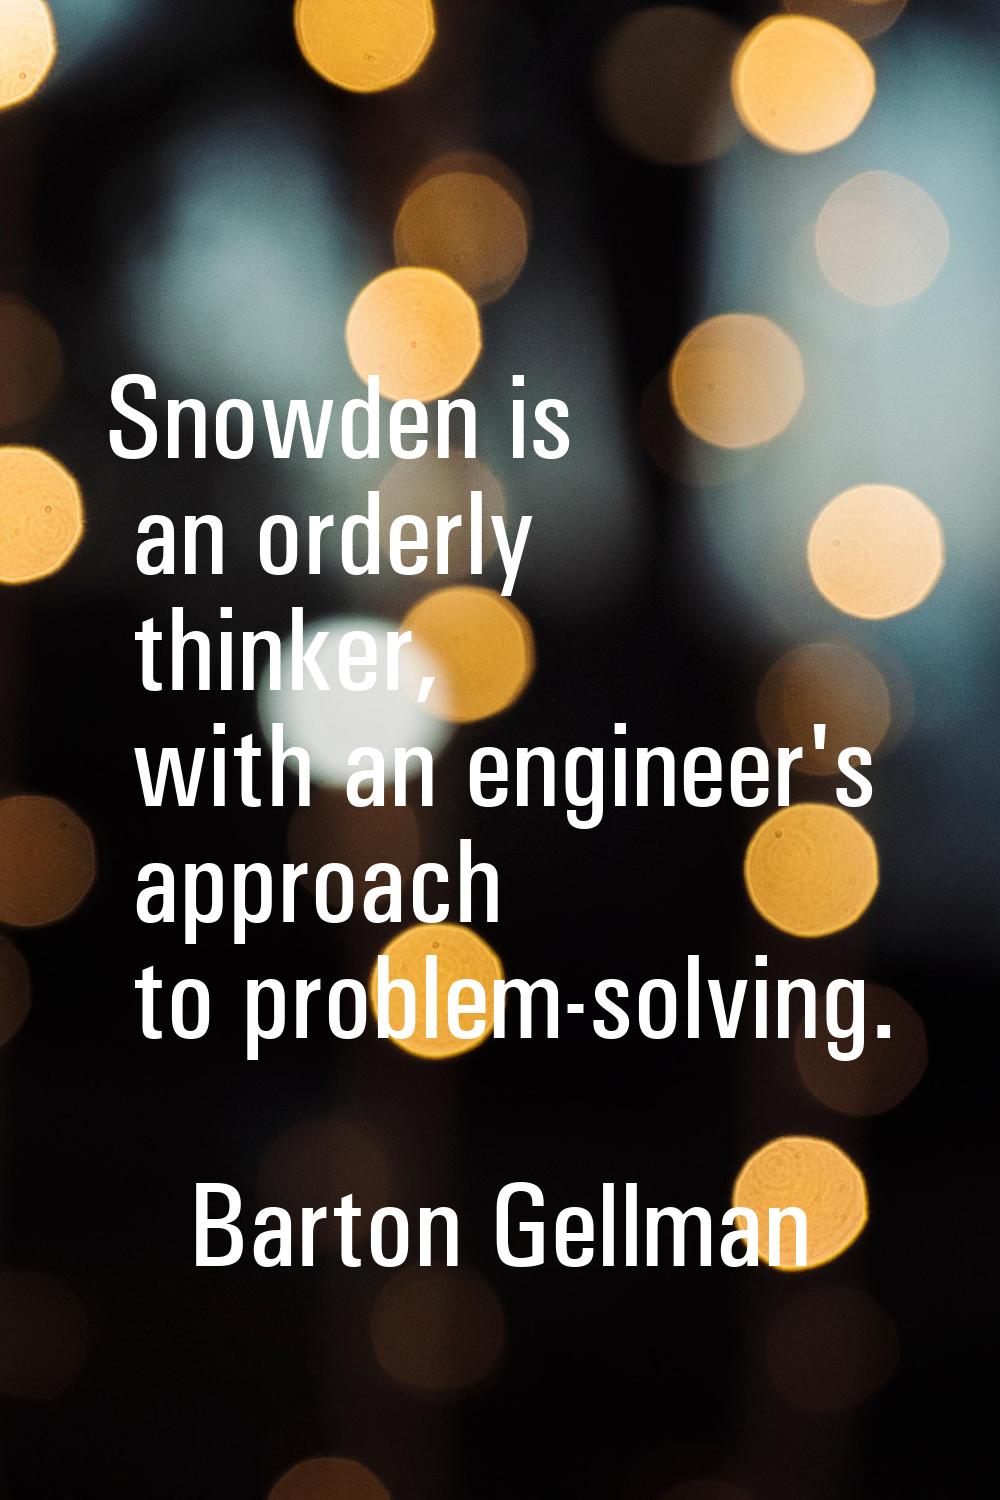 Snowden is an orderly thinker, with an engineer's approach to problem-solving.